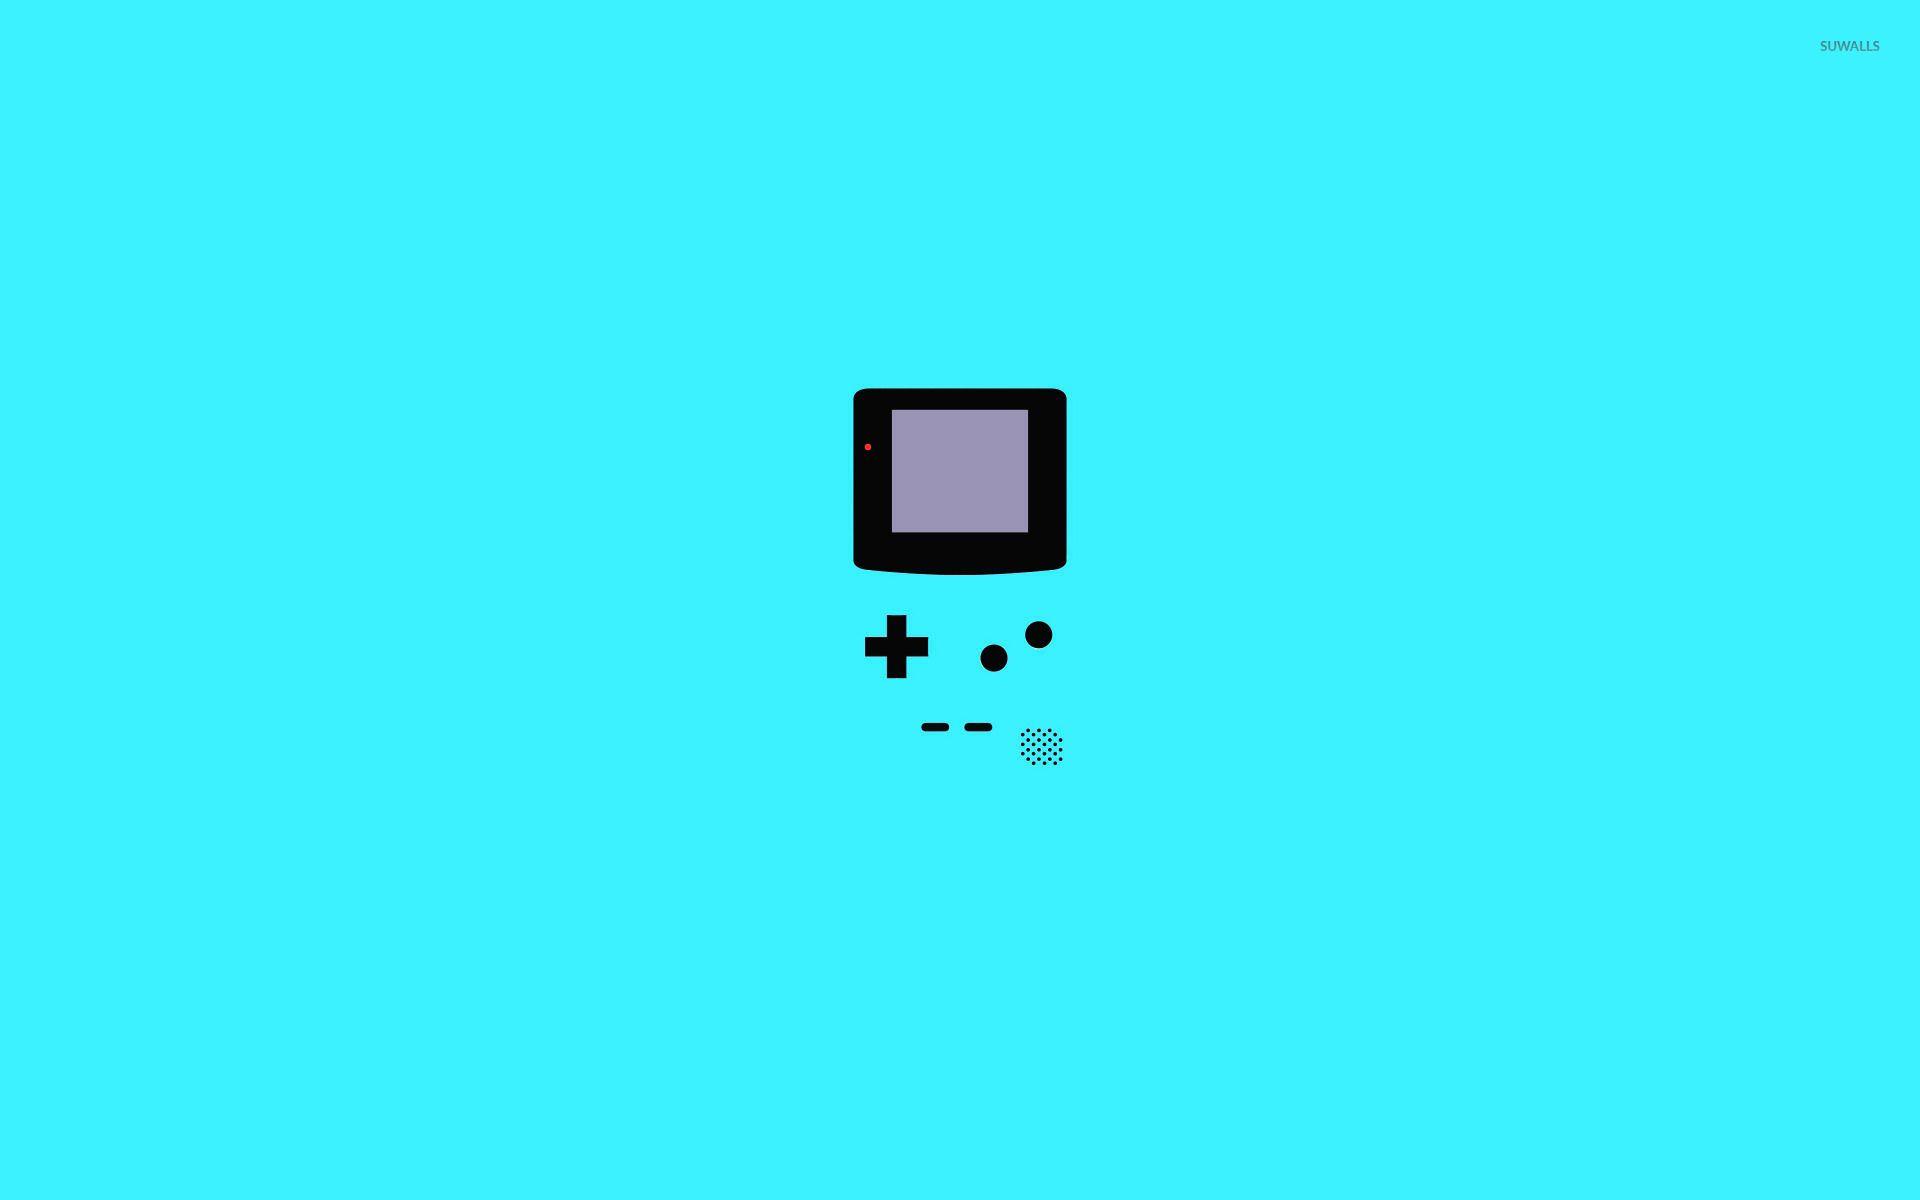 Gameboy Advance Wallpaper on iPhone are lit . #iphonewallpaper #gamebo